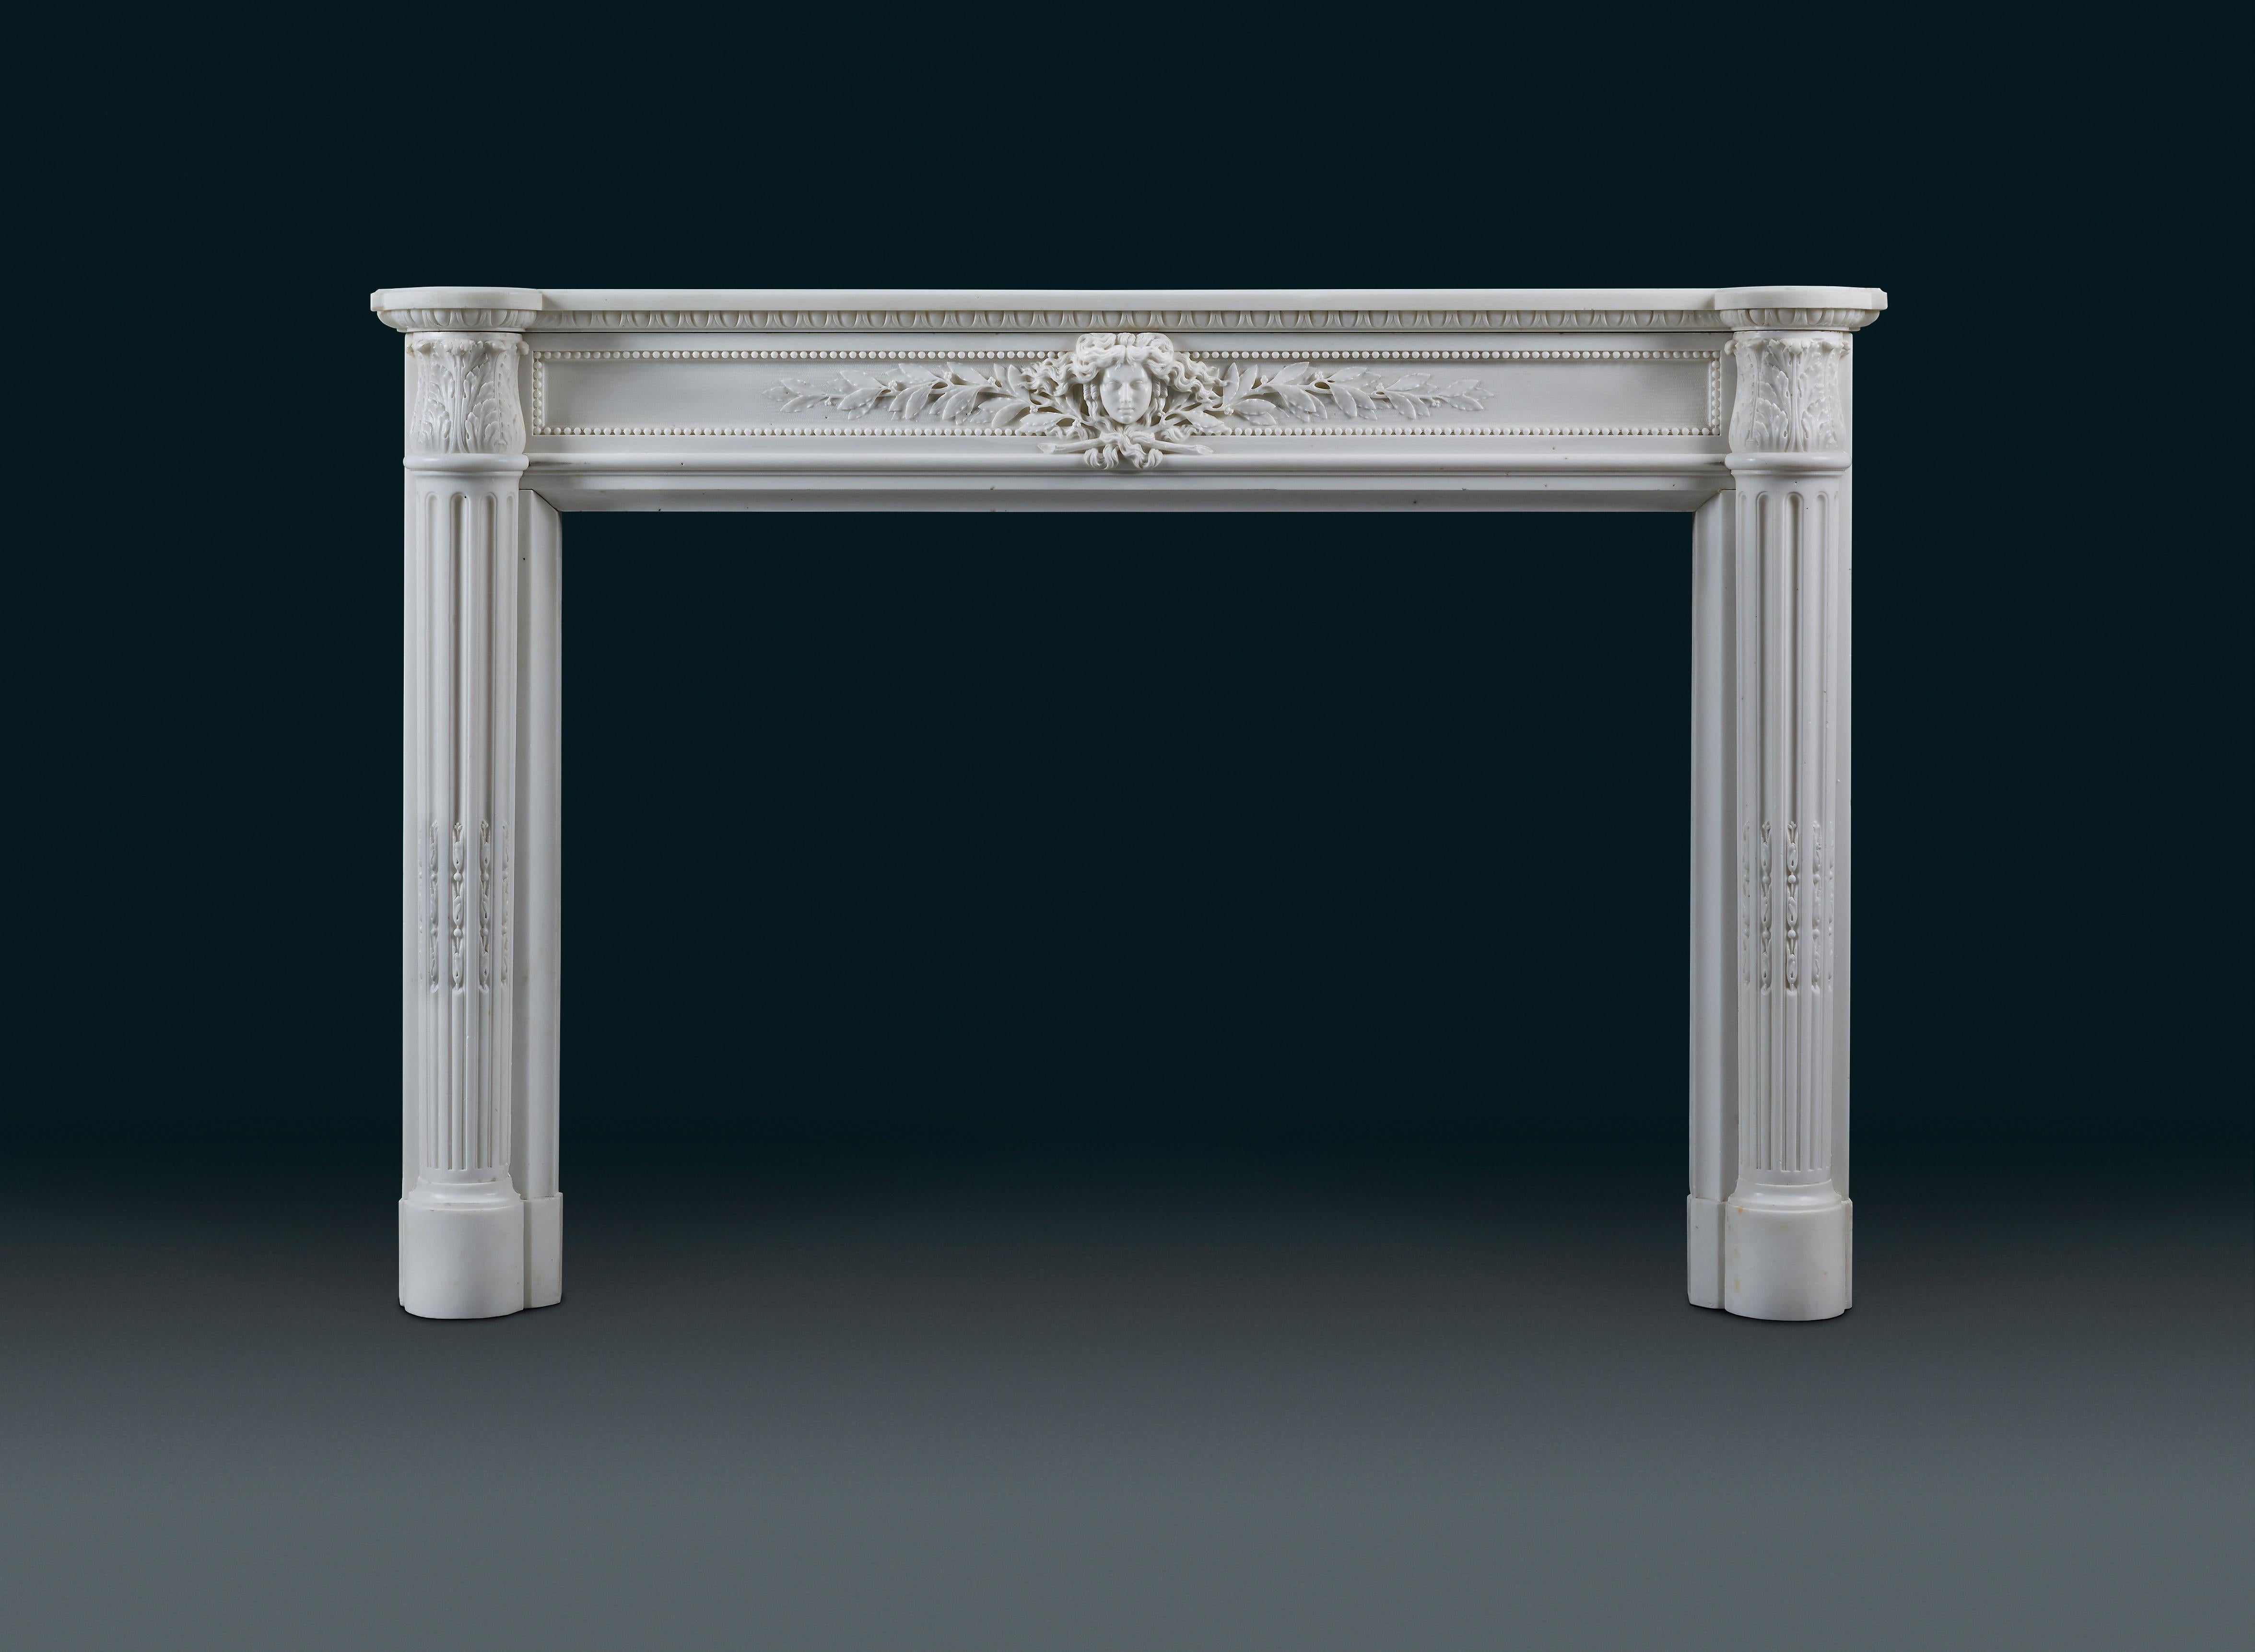 A superb 18th century French, Louis XV (1774-1794) style and period, antique statuary marble chimneypiece.
Of typical rectangular form and carved to the very highest quality. The shelf breaking forward over the jambs, the frieze headed with a band